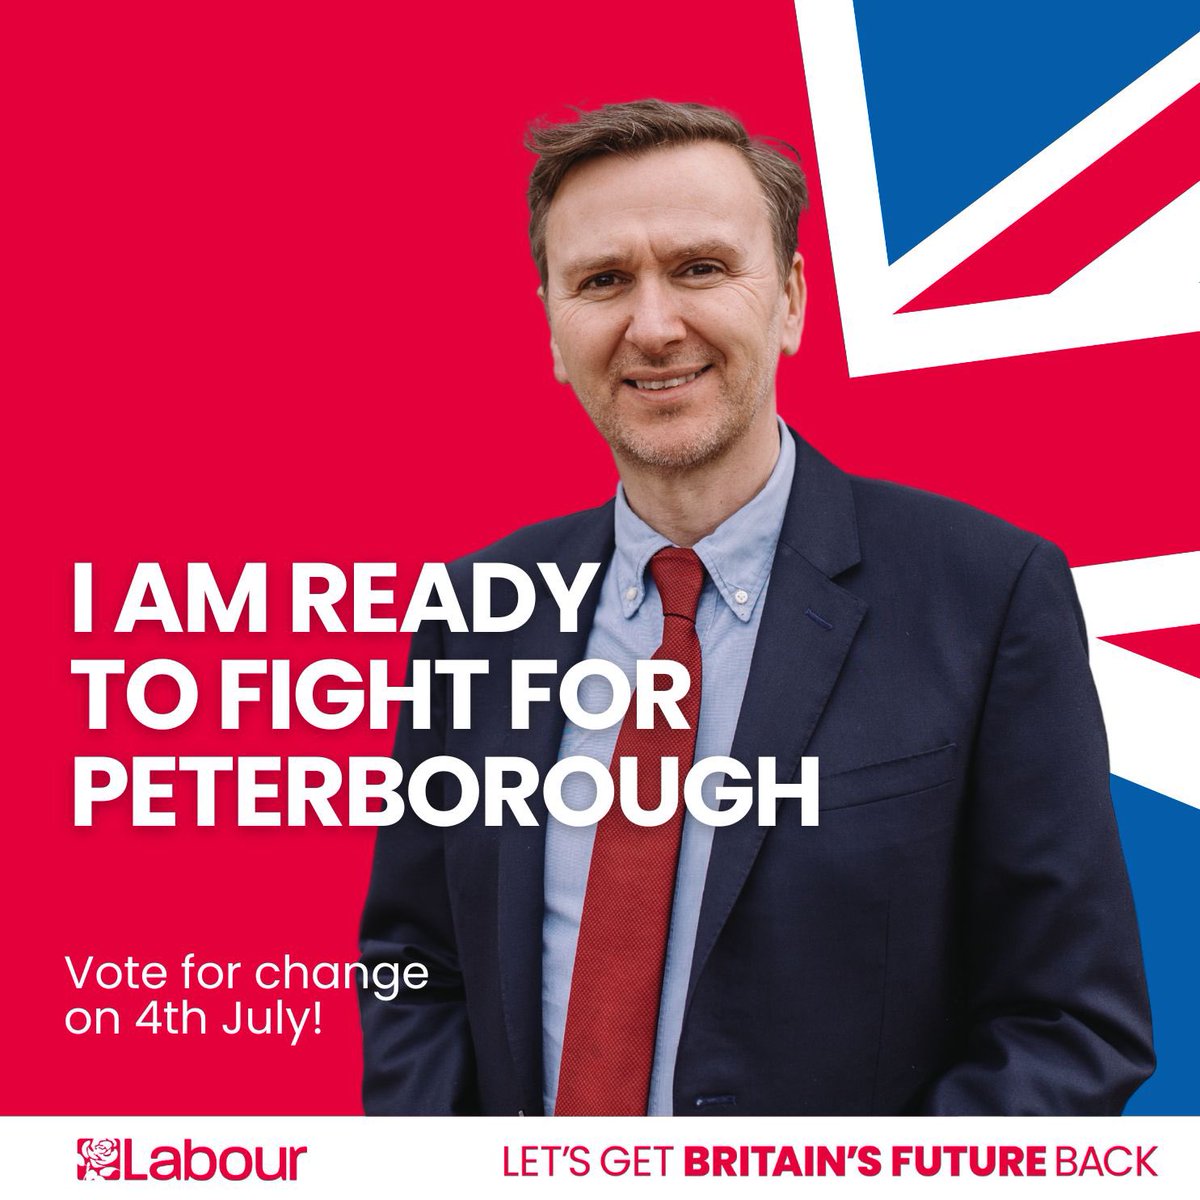 Let’s do this. It’s time for change in Peterborough and the country. A fresh start. Getting Peterborough back on its feet, together. Join me.